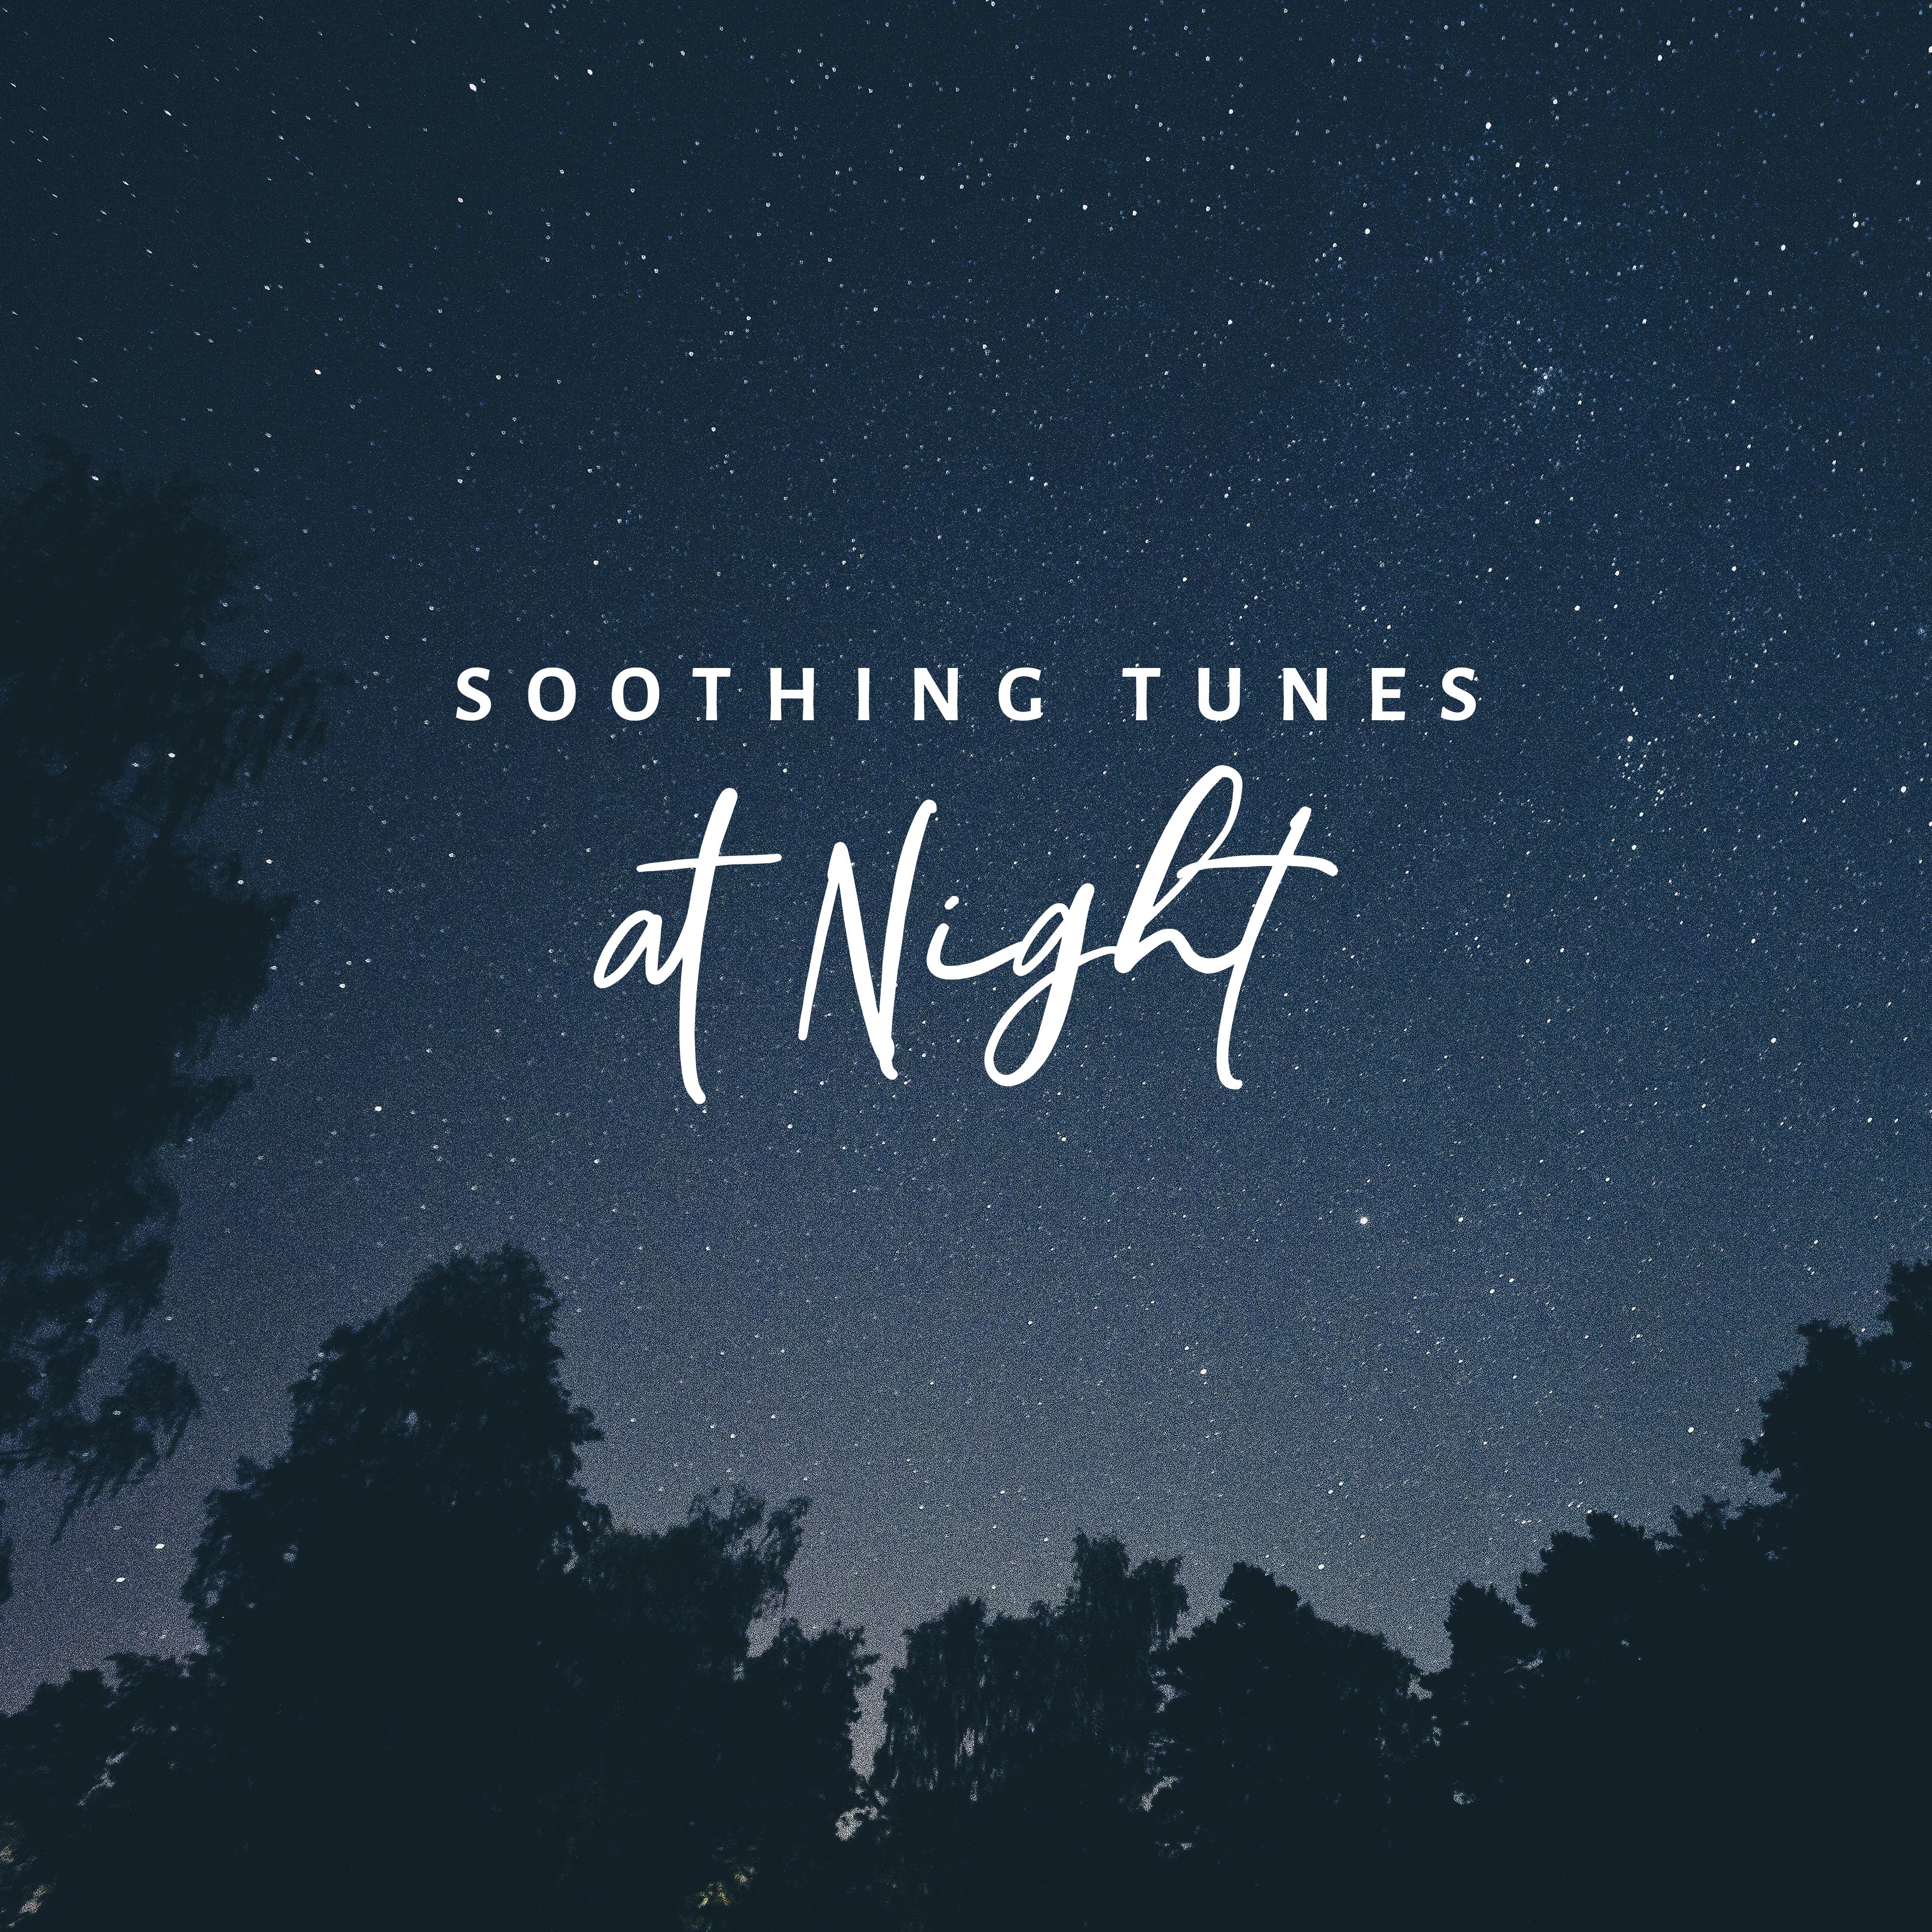 Soothing Tunes at Night - Jazz Soft Songs, Soothing Jazz & Relax, Mellow Jazz for Pure Relaxation, Gentle Jazz Collection for Sleep, Jazz Music Ambient